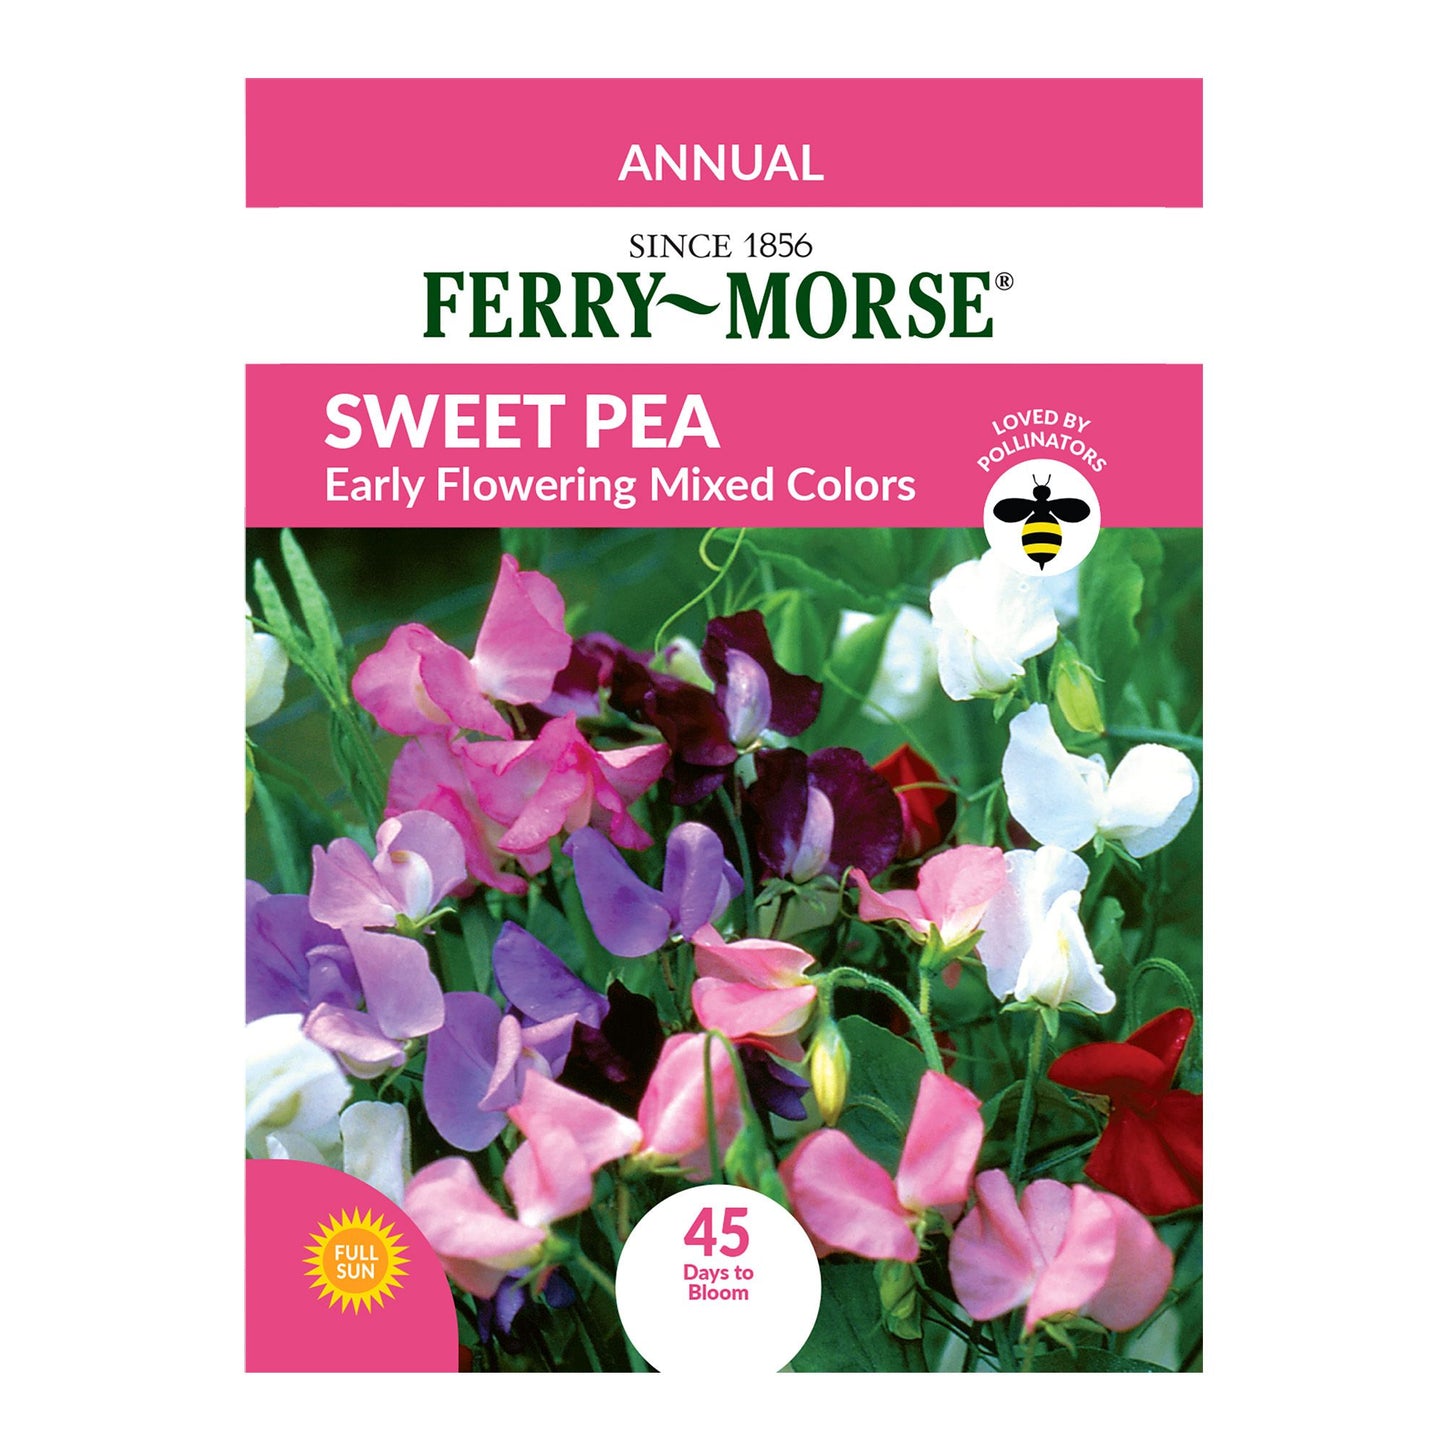 Sweet Pea, Early Flowering Mixed Colors Seeds